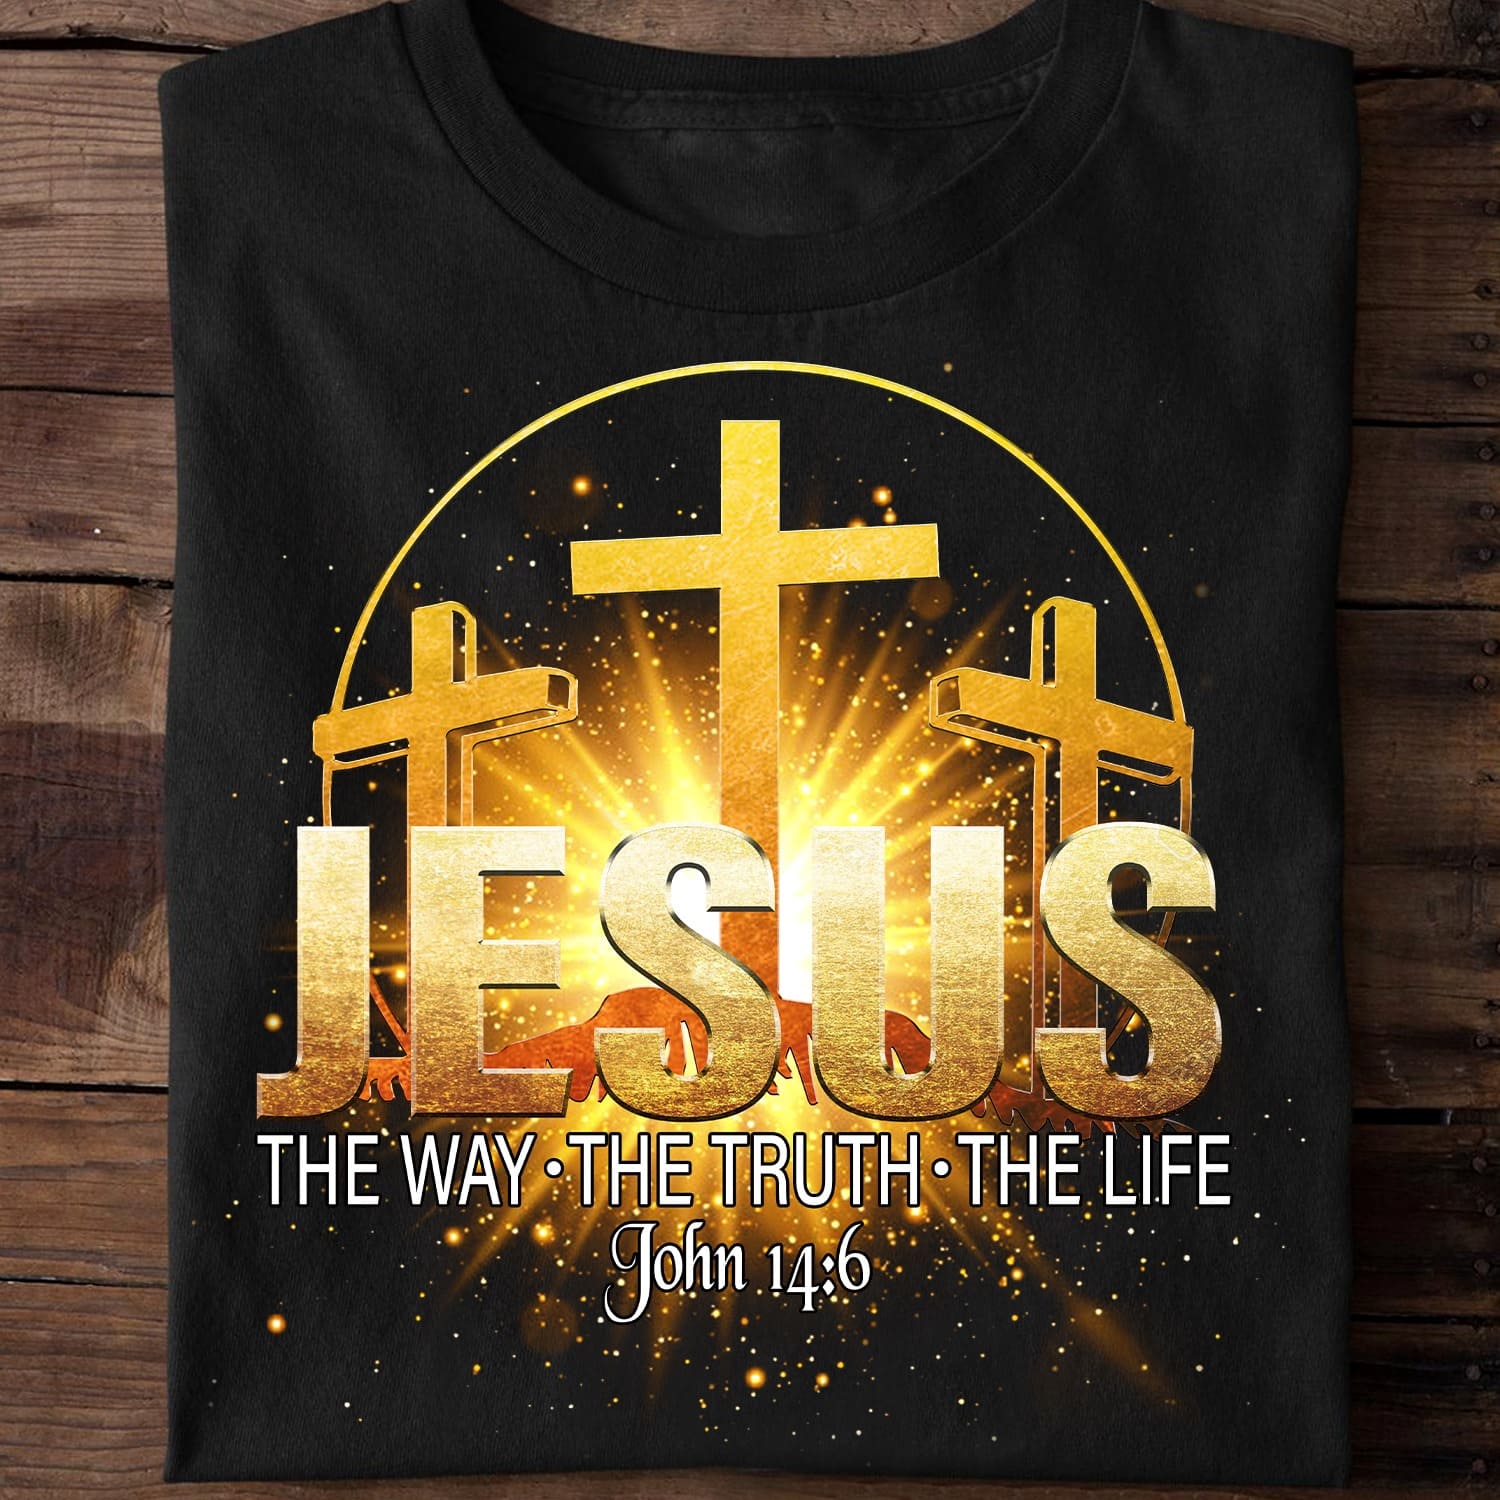 Jesus the way, the truth, the life - Believe in Jesus, T-shirt for Christian